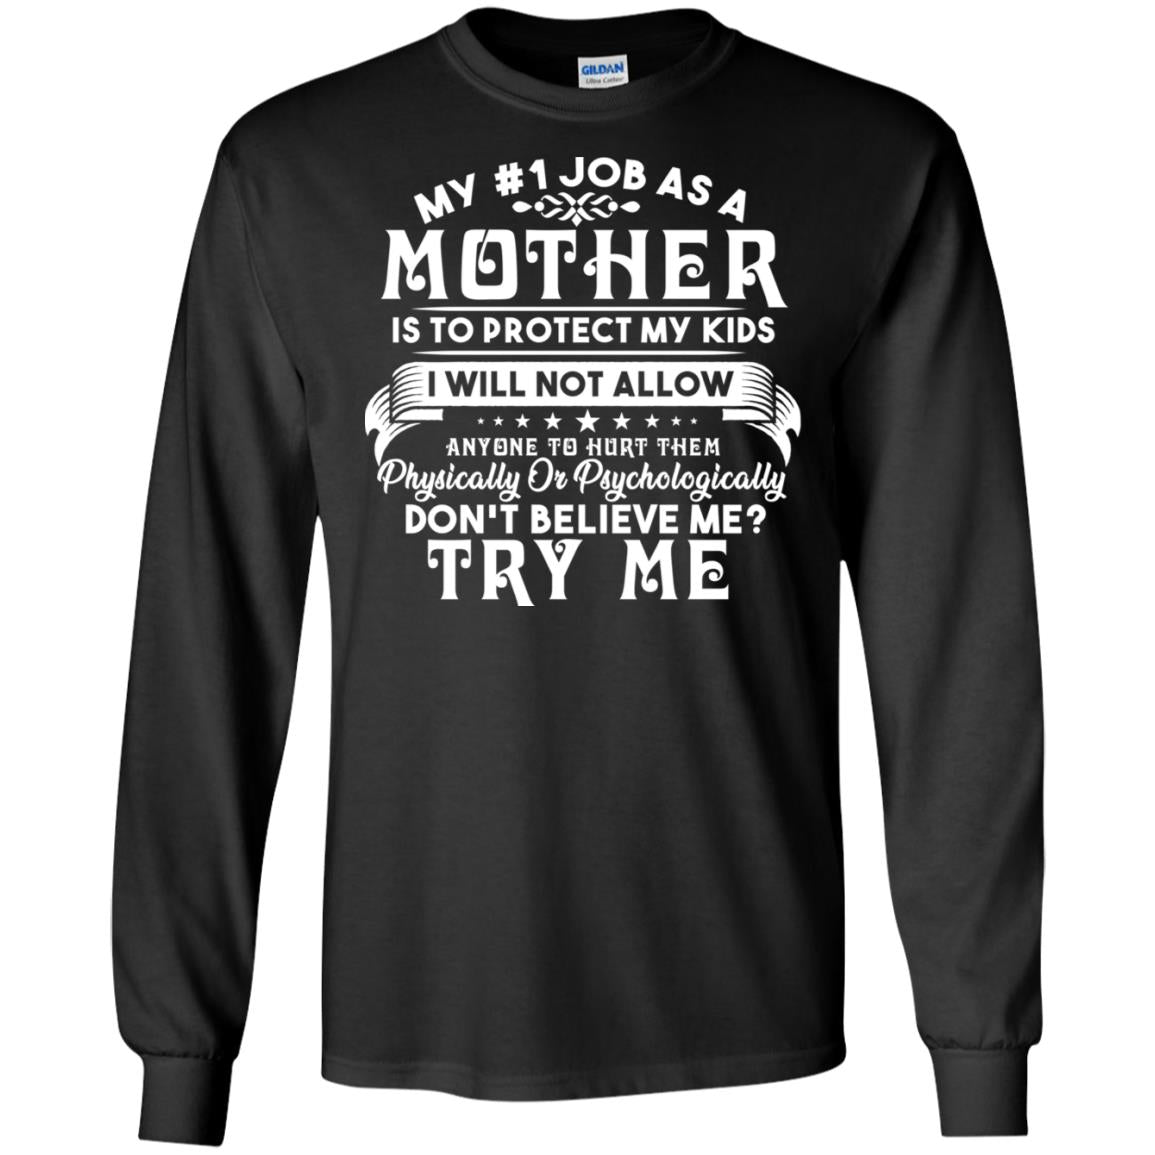 My #1 Job As A Mother Is To Protect My Kids I Will Not Allow Anyone To Hurt Them ShirtG240 Gildan LS Ultra Cotton T-Shirt